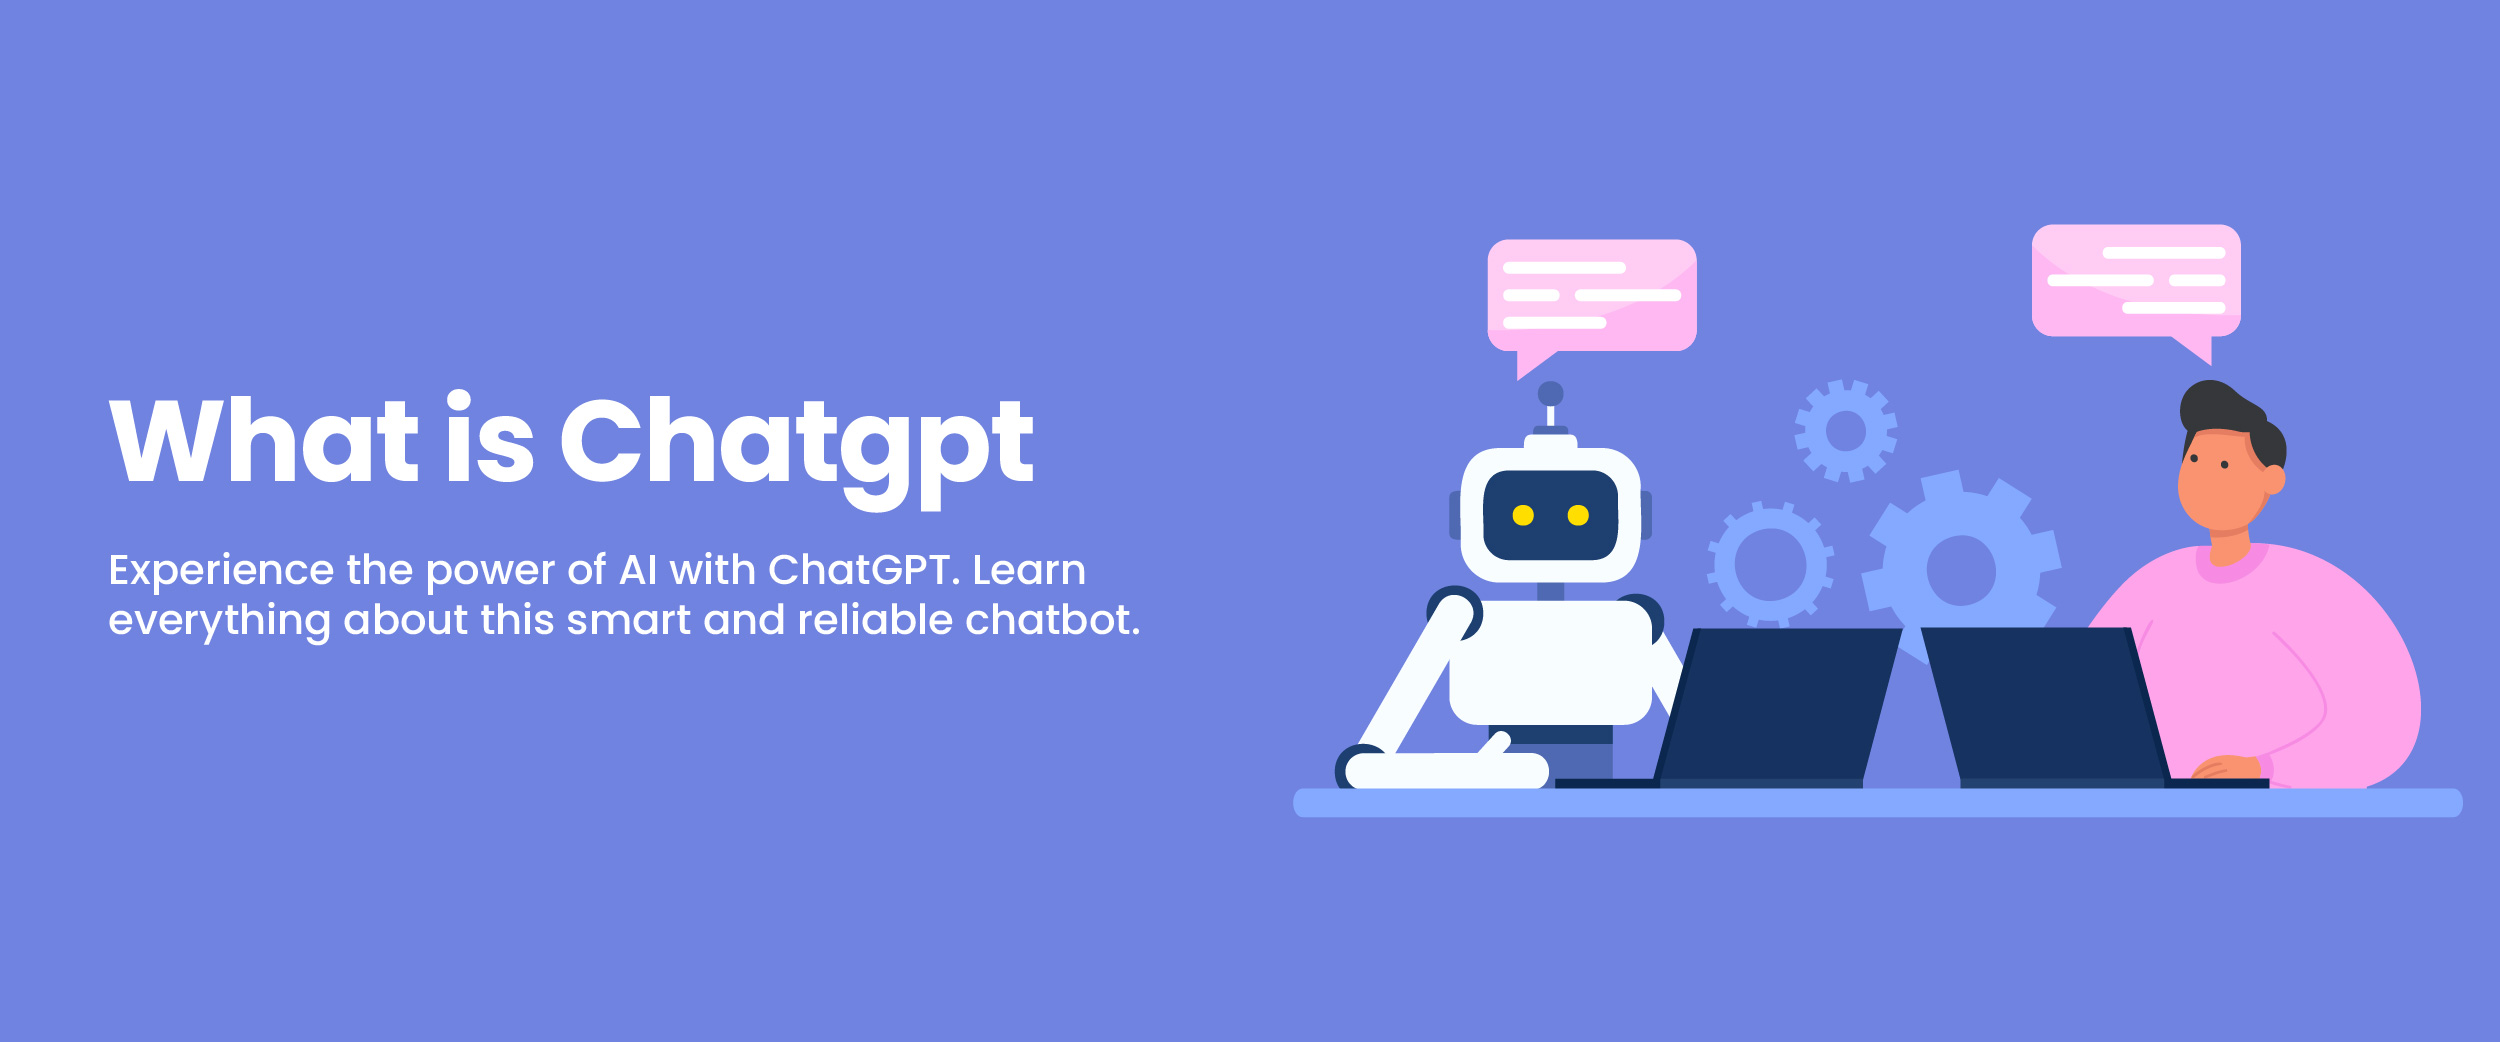 What Is ChatGPT: Here’s Everything You Need to Know About It